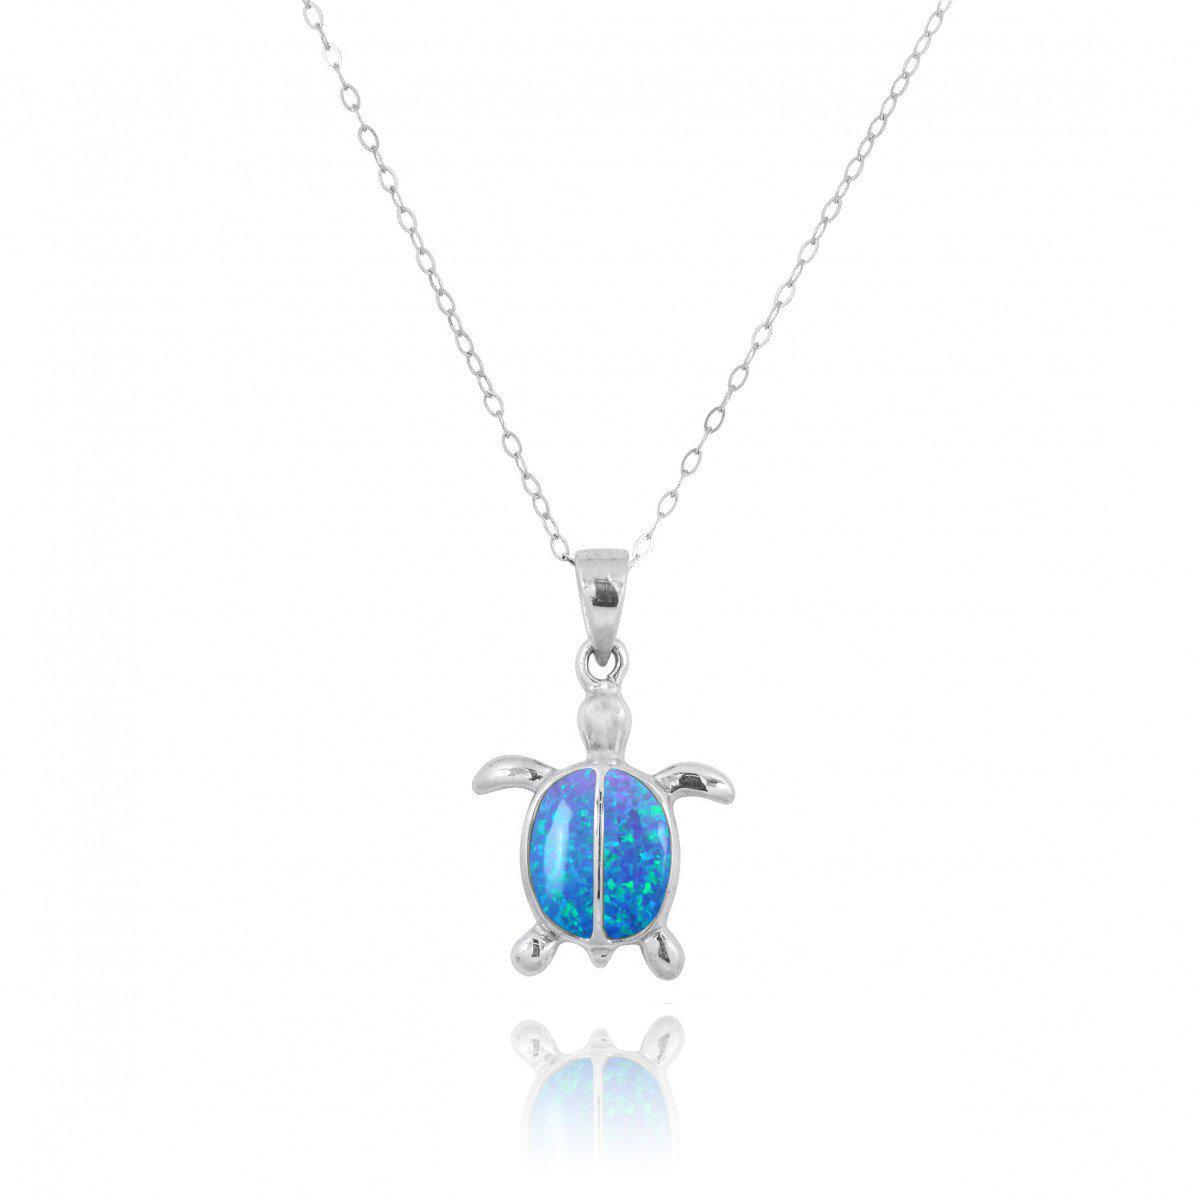 Sterling Silver Turtle with 2 Blue Opal Stones Pendant Necklace